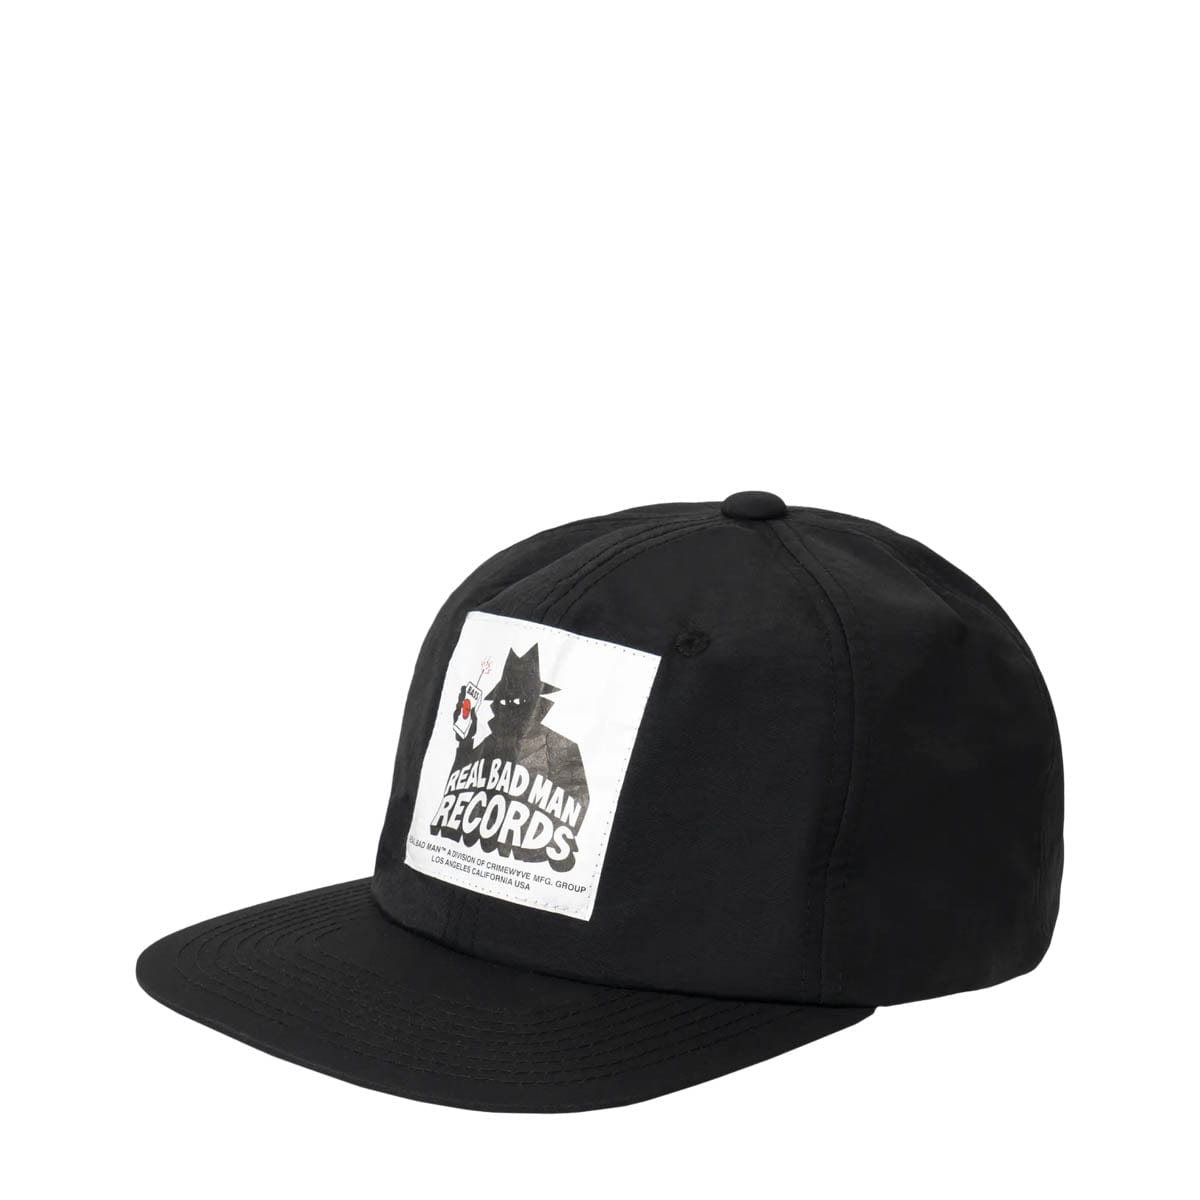 Real Bad Man Accessories - HATS - Snapback-Fitted Hat BLACK / O/S RBM 6 PANEL HAT